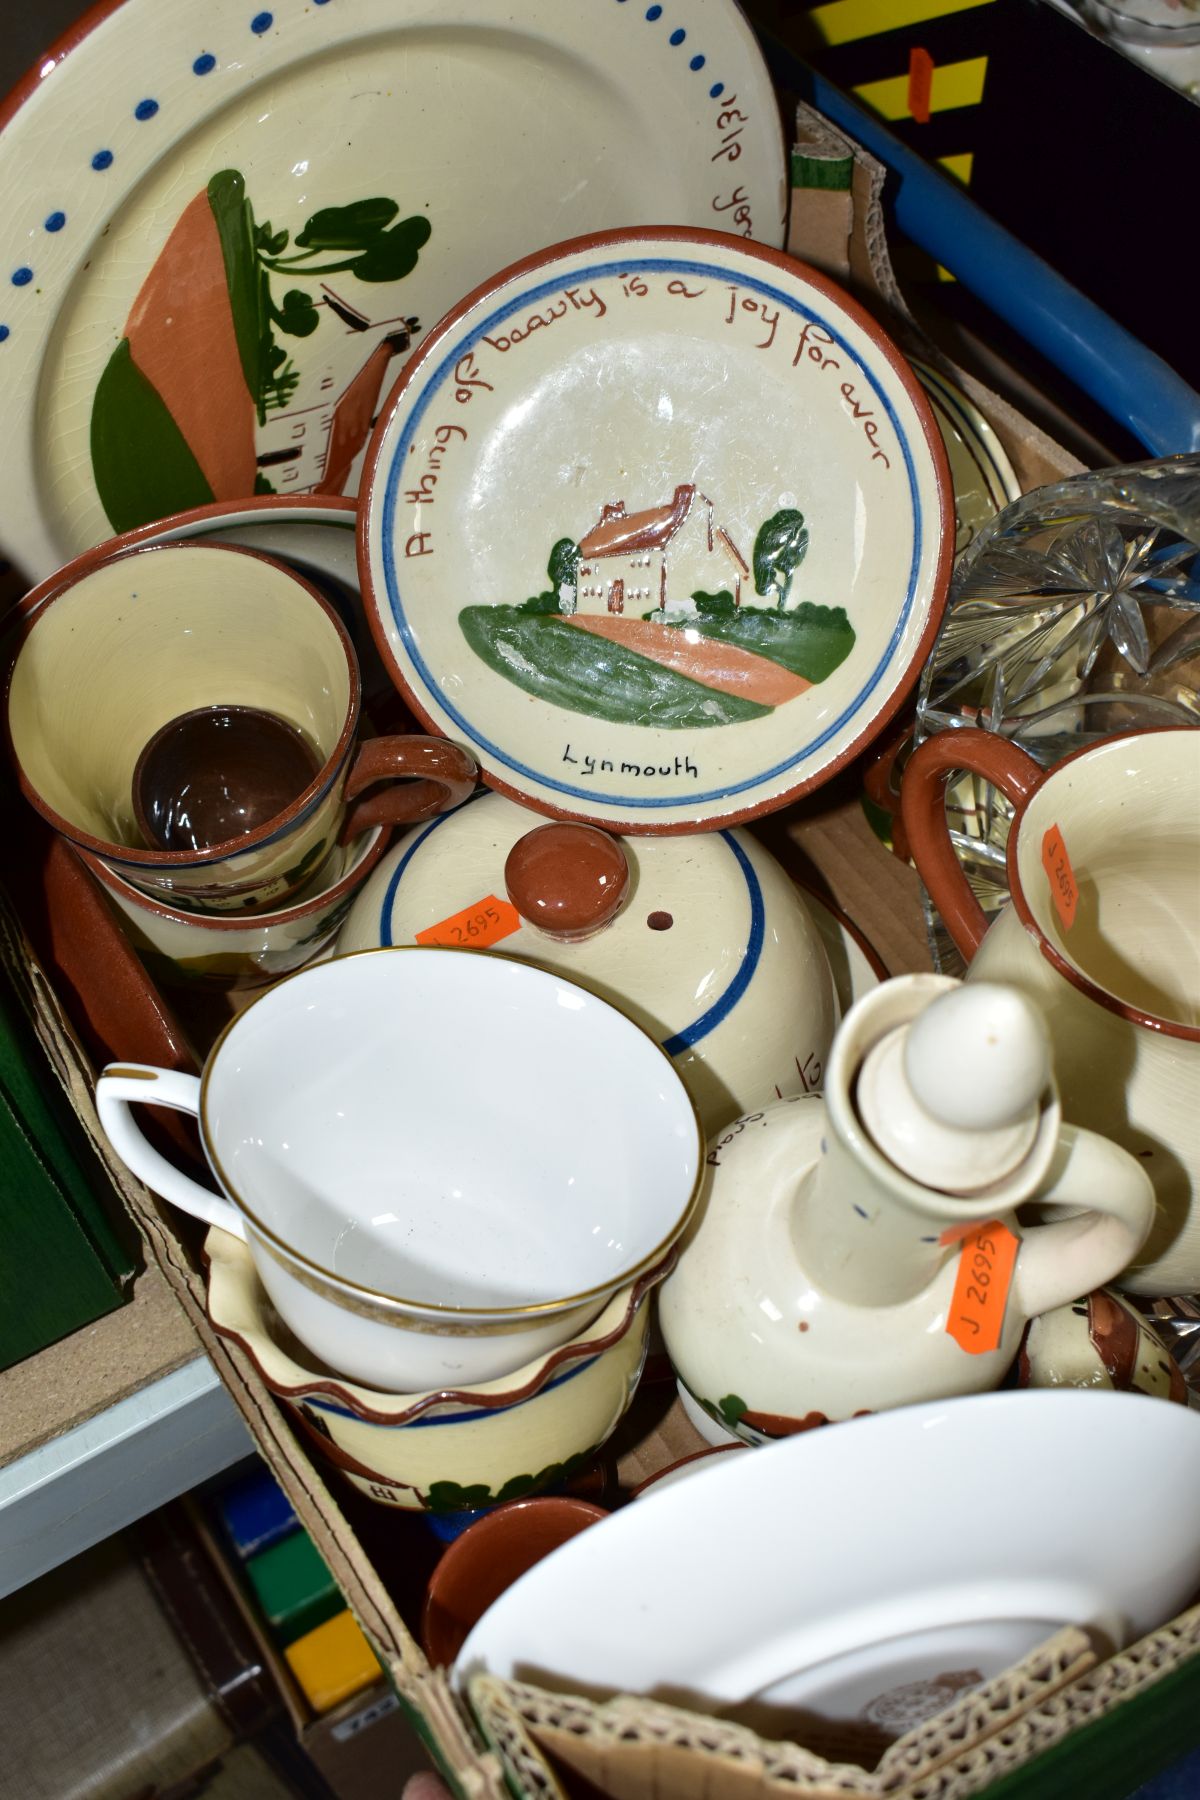 A BOX OF DEVON MOTTO WARE ETC, to include cups, cheese dish with cover, egg cups, water jug etc - Image 3 of 6